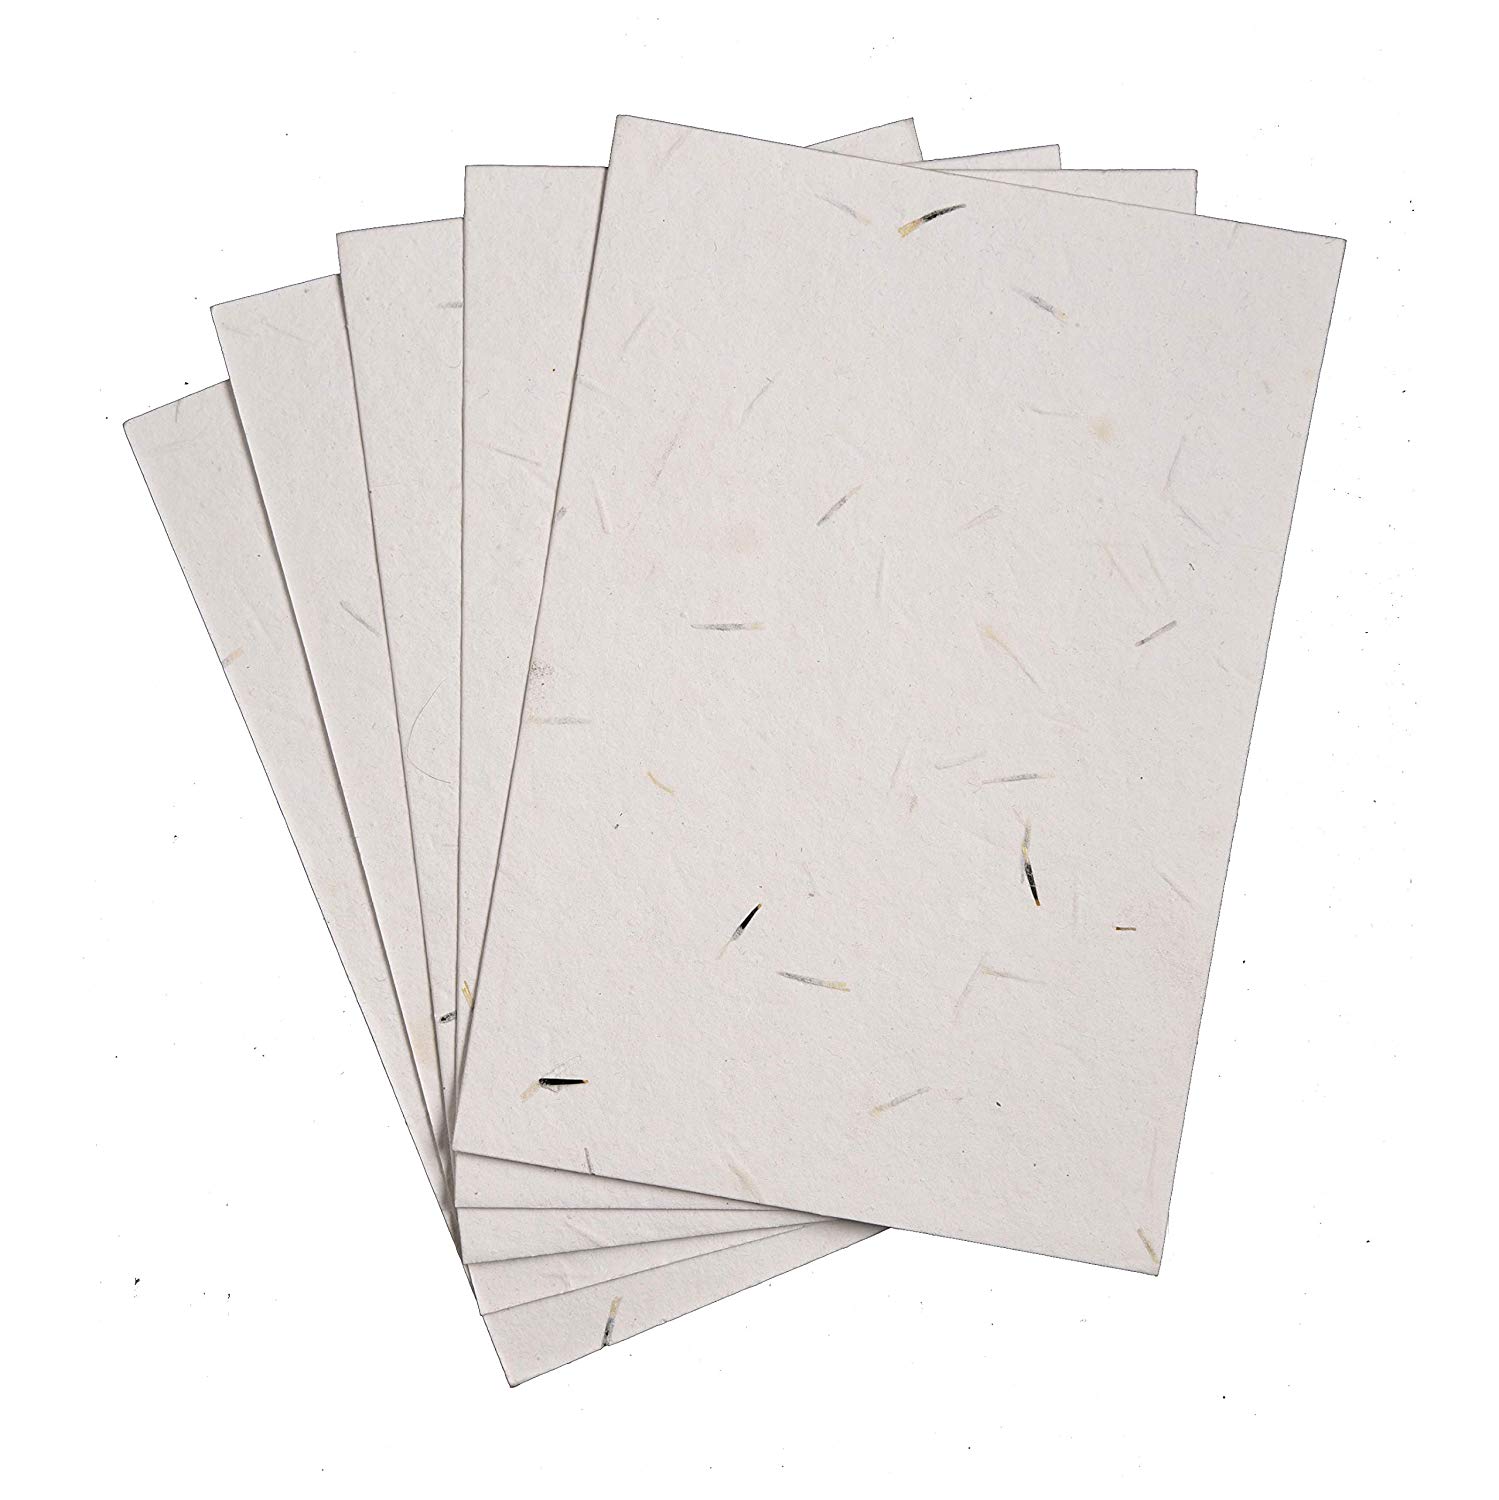 Plantable Seed Paper A4 Size (Pack of 5)